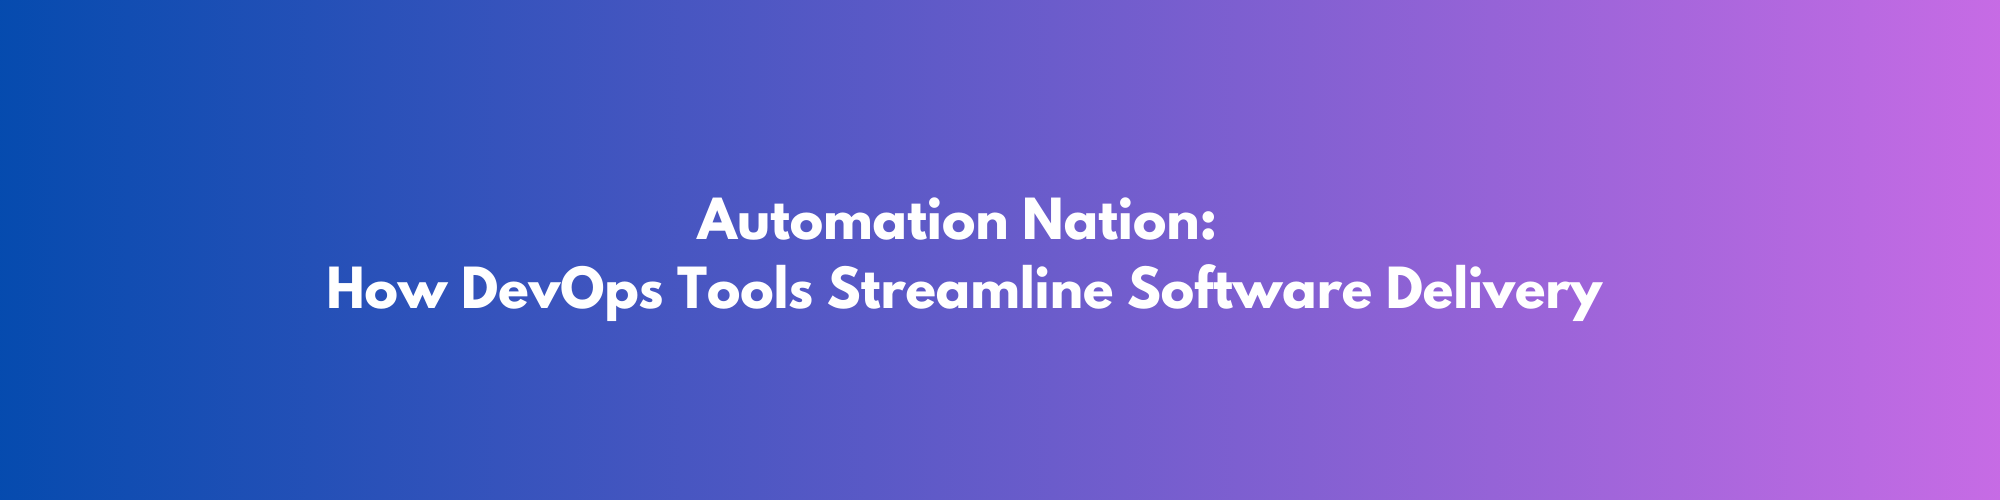 Automation Nation: How DevOps Tools Streamline Software Delivery